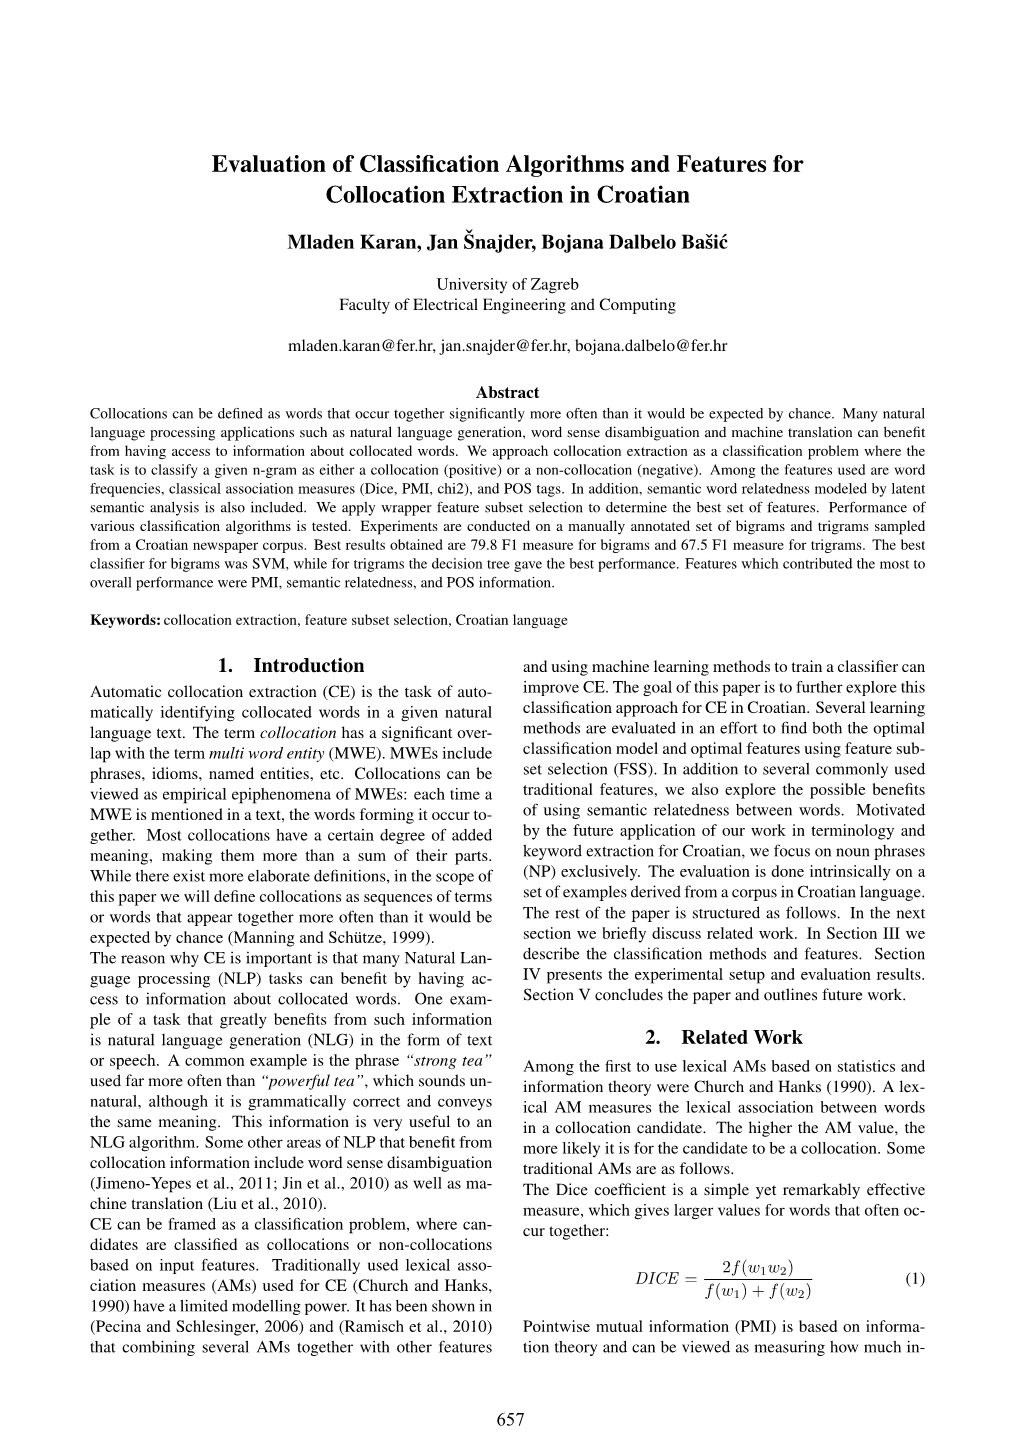 Evaluation of Classification Algorithms and Features for Collocation Extraction in Croatian